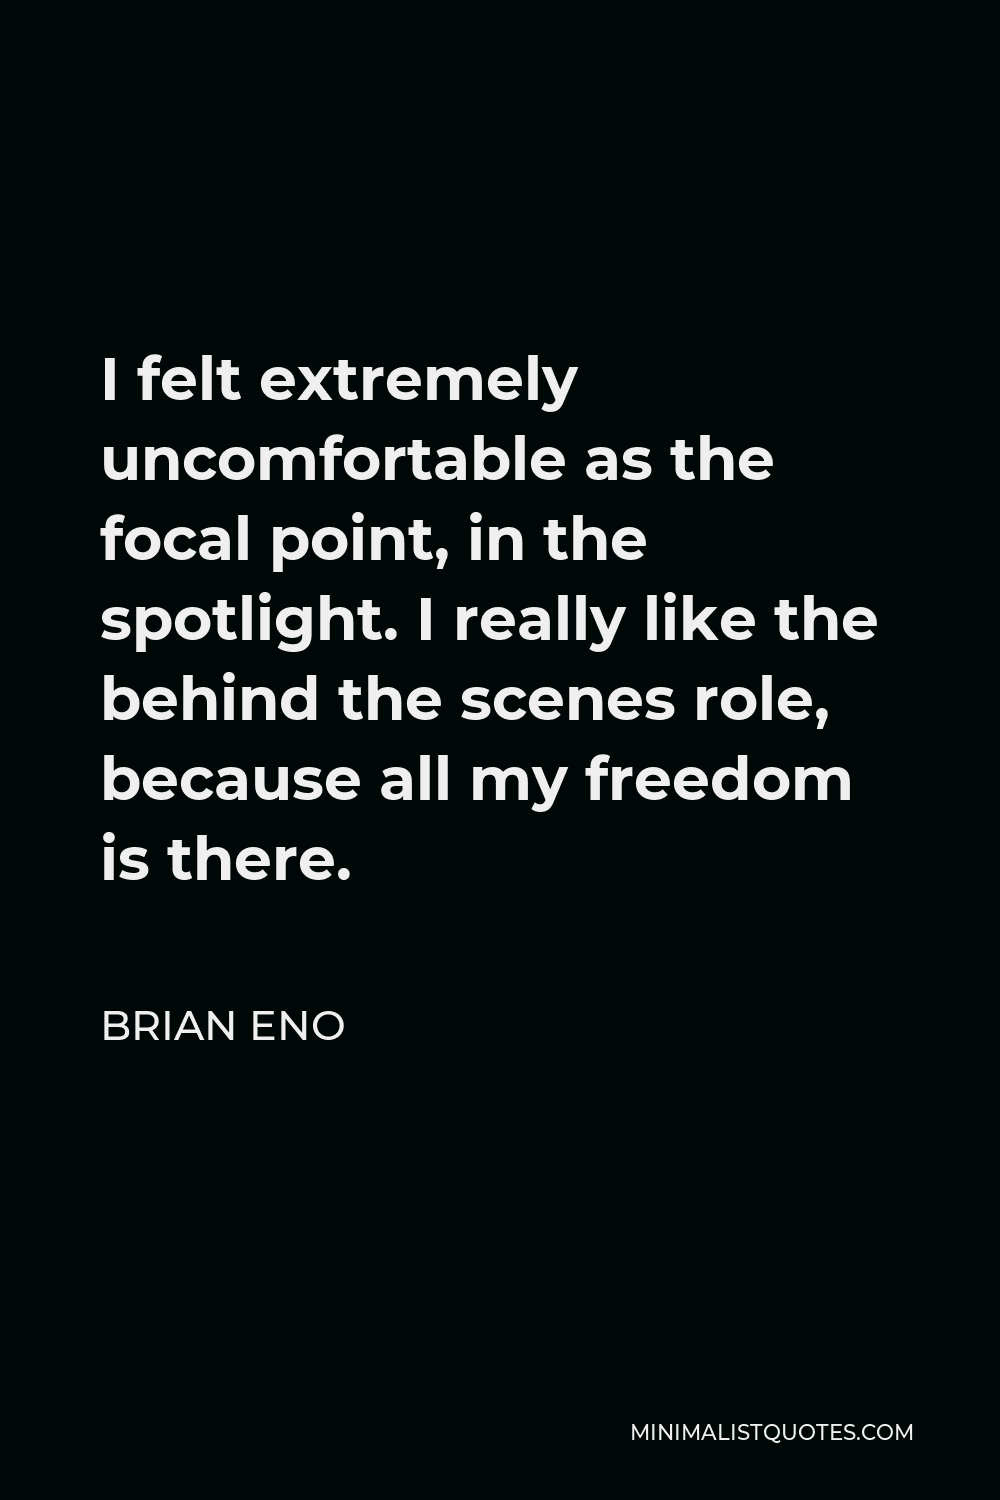 Brian Eno Quote - I felt extremely uncomfortable as the focal point, in the spotlight. I really like the behind the scenes role, because all my freedom is there.